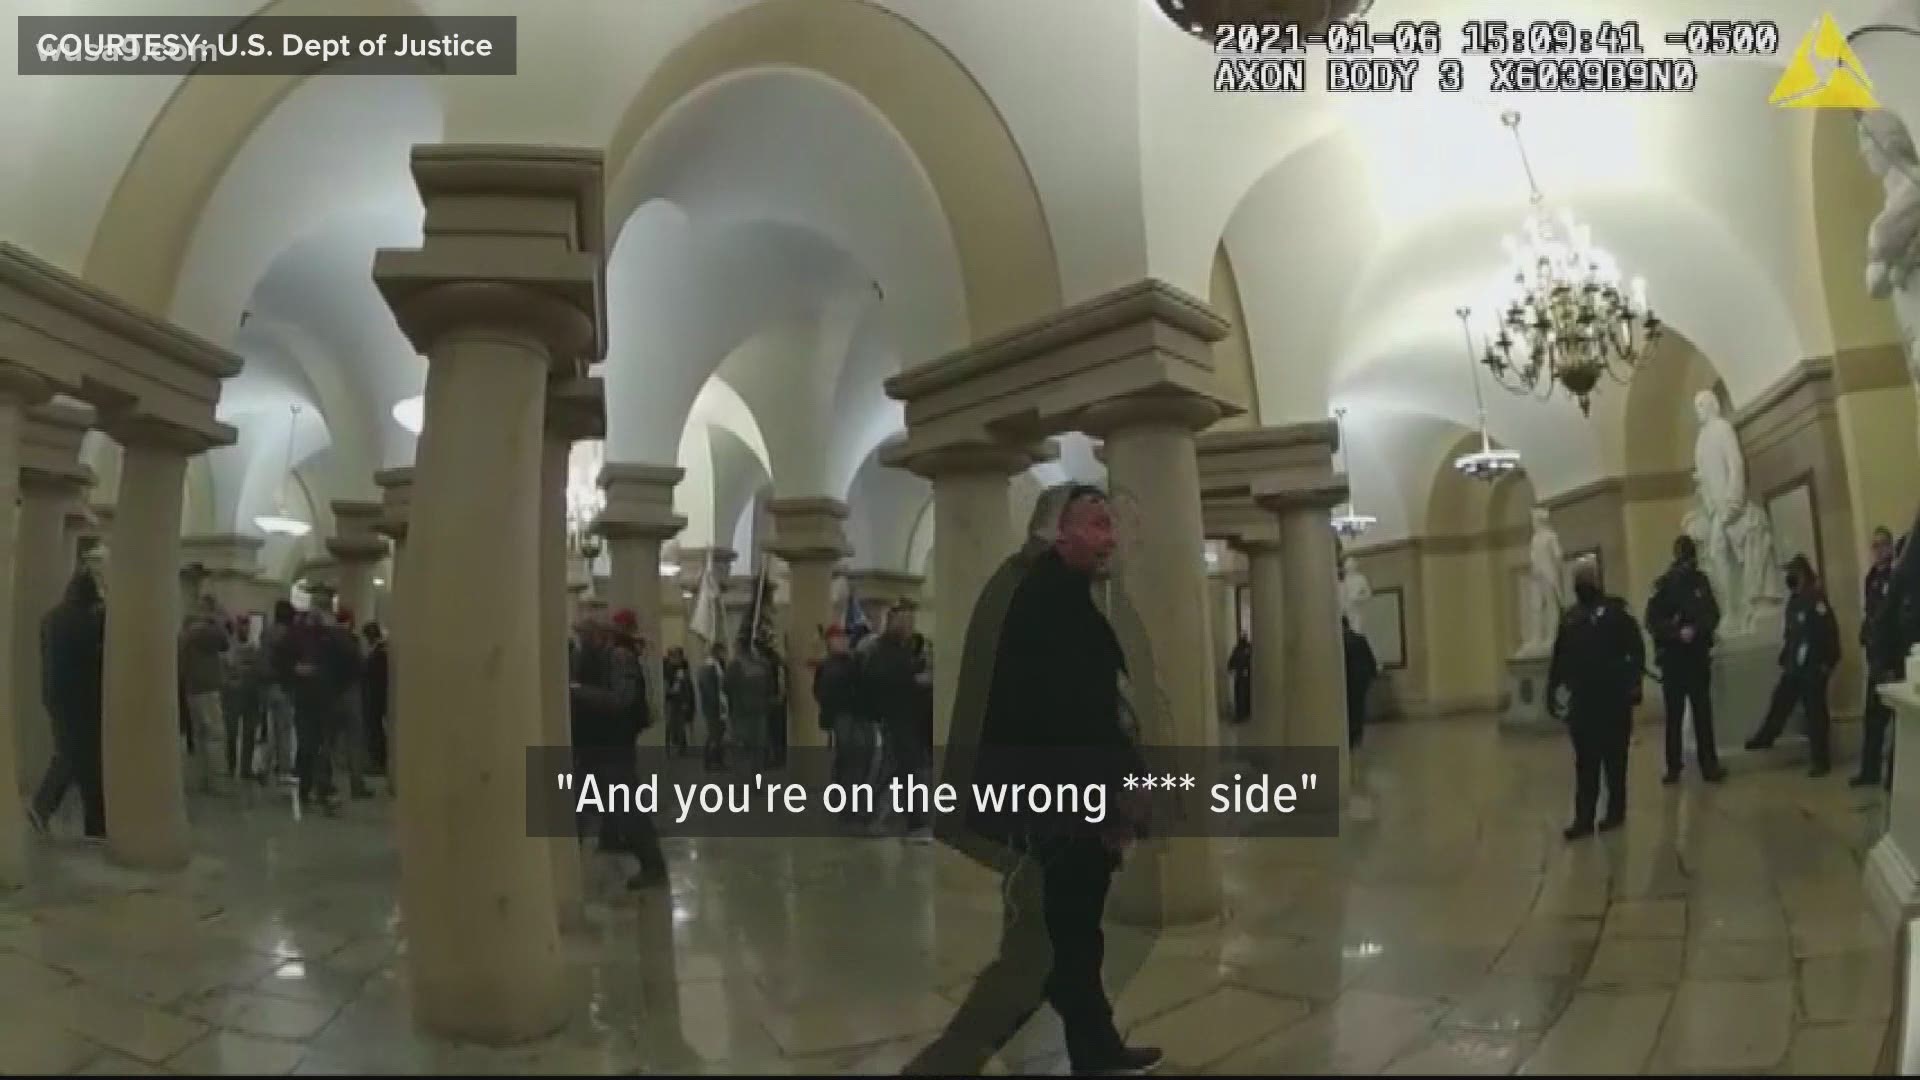 Four new clips released to WUSA9 and other media organizations show Daniel Egtvedt berating and physically engaging with police inside the Capitol on January 6.